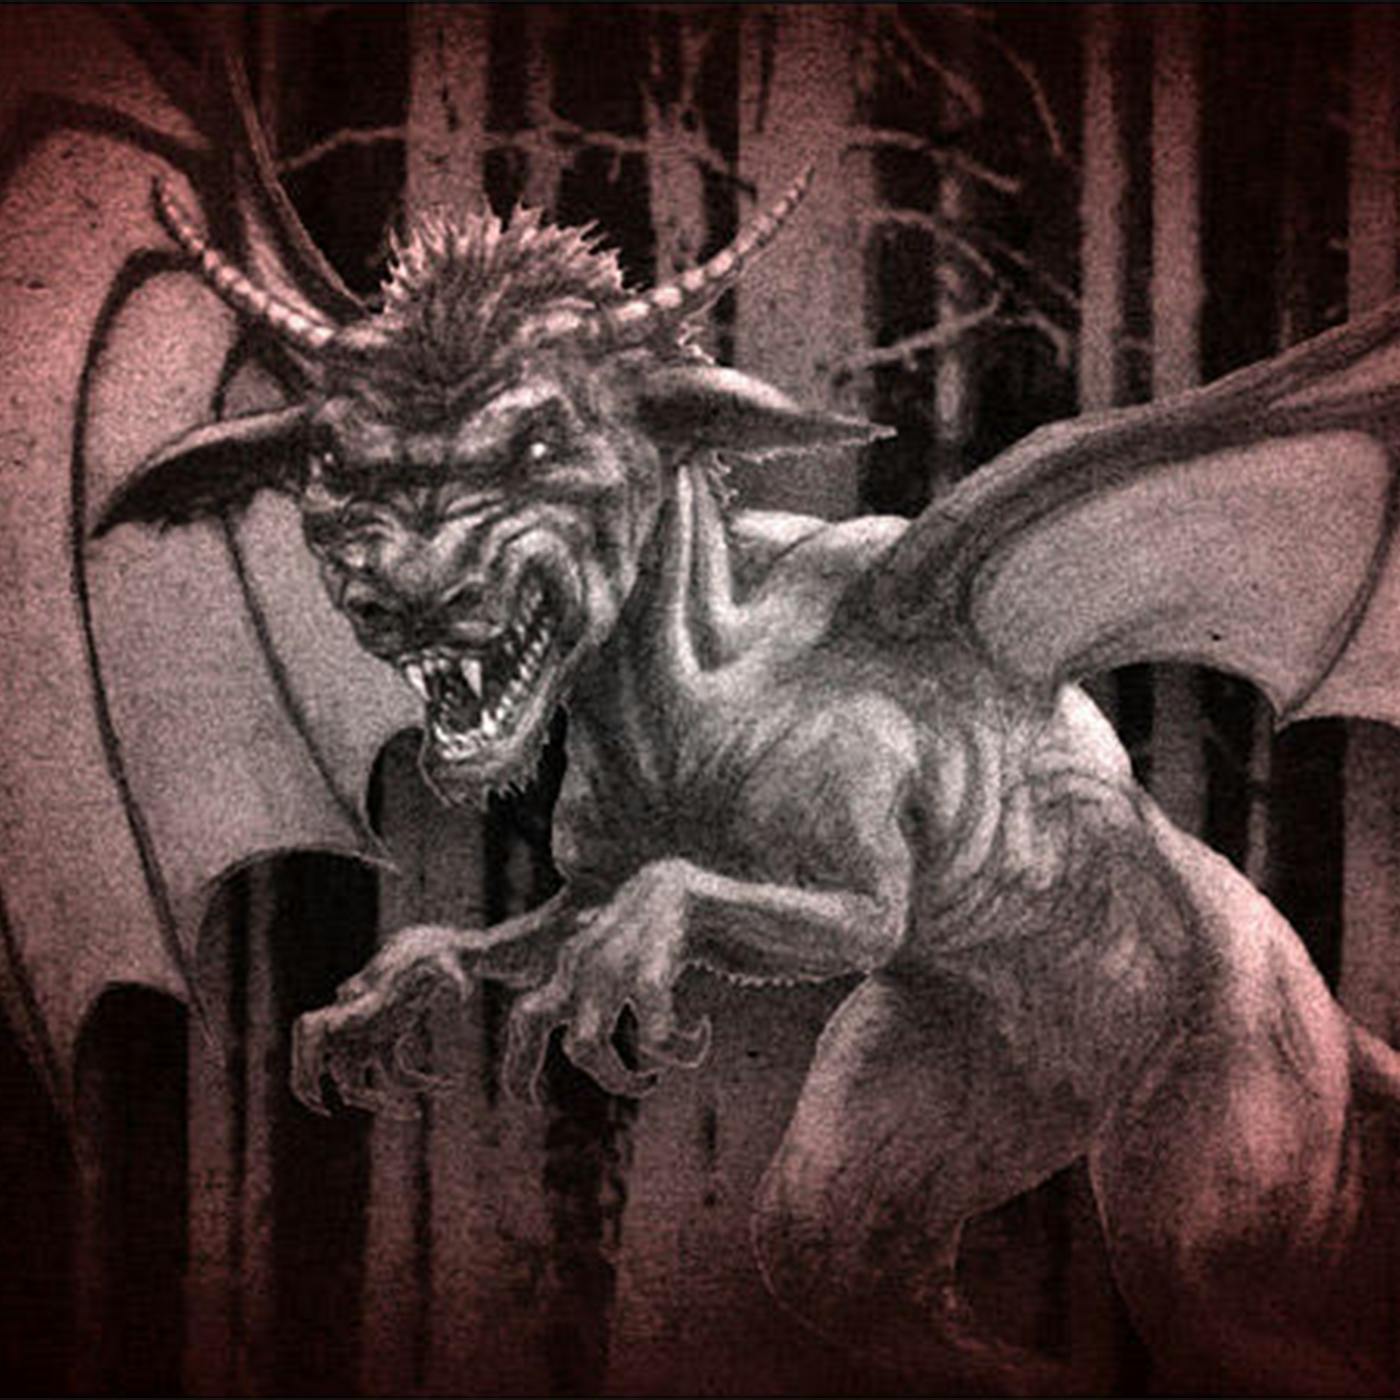 Episode 12: The Jersey Devil - The History Behind New Jersey's Most Famous Cryptid